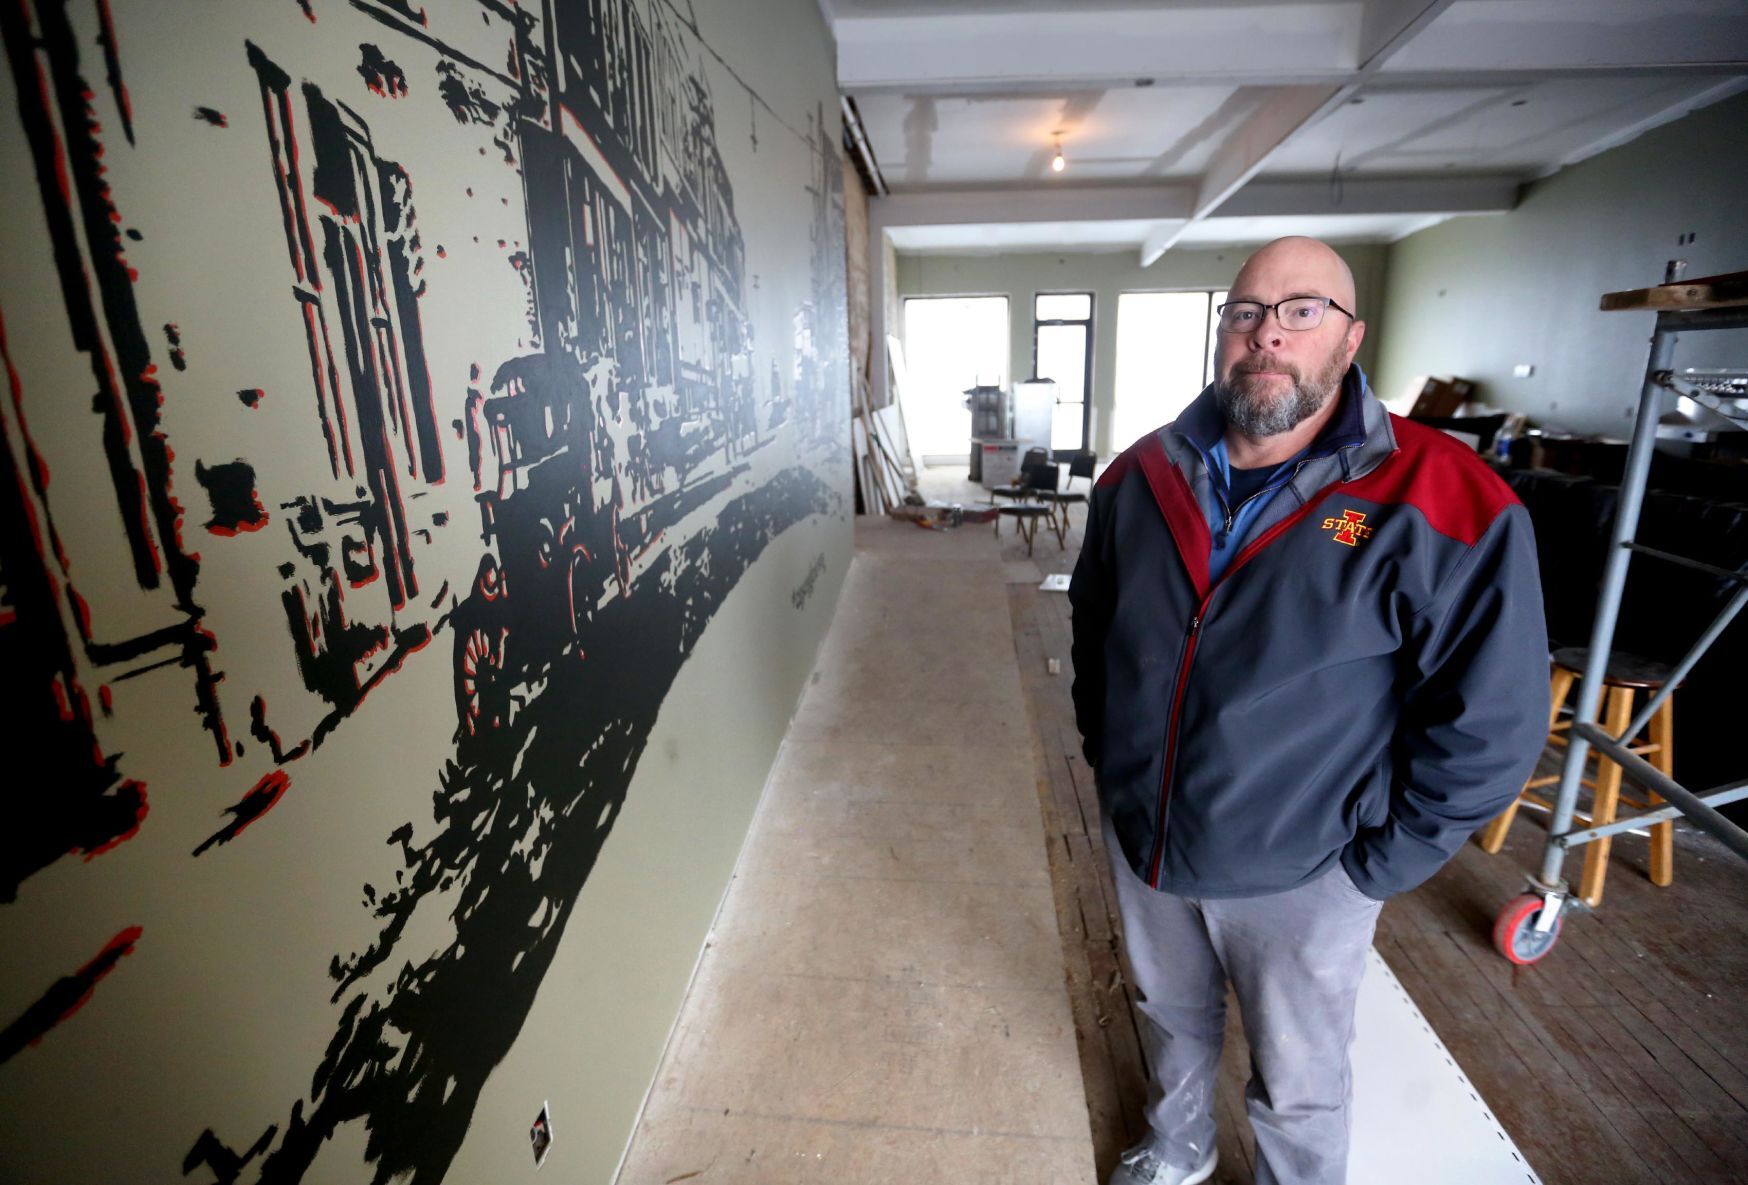 Owner Tom Olberding is optimistic about Corner Tap Room, which he said he plans to have open by the Super Bowl on Feb. 7. PHOTO CREDIT: JESSICA REILLY, Telegraph Herald